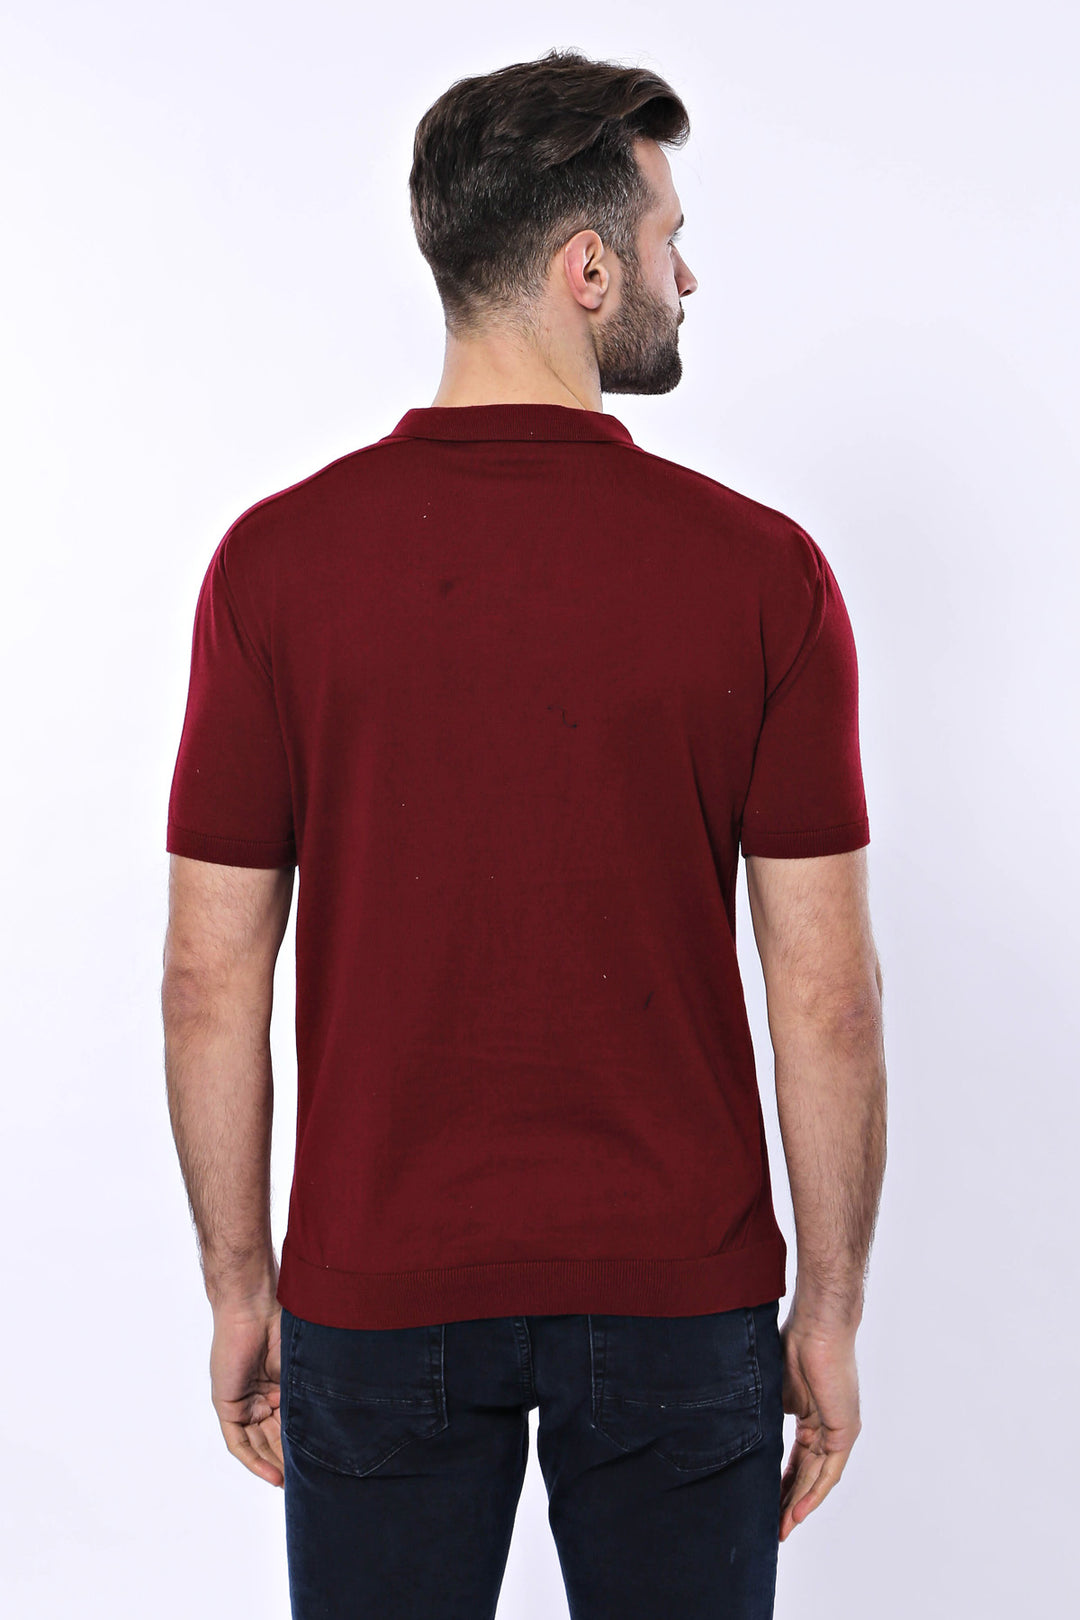 Polo Neck Plain Claret Red Knitted T-Shirt - Wessi